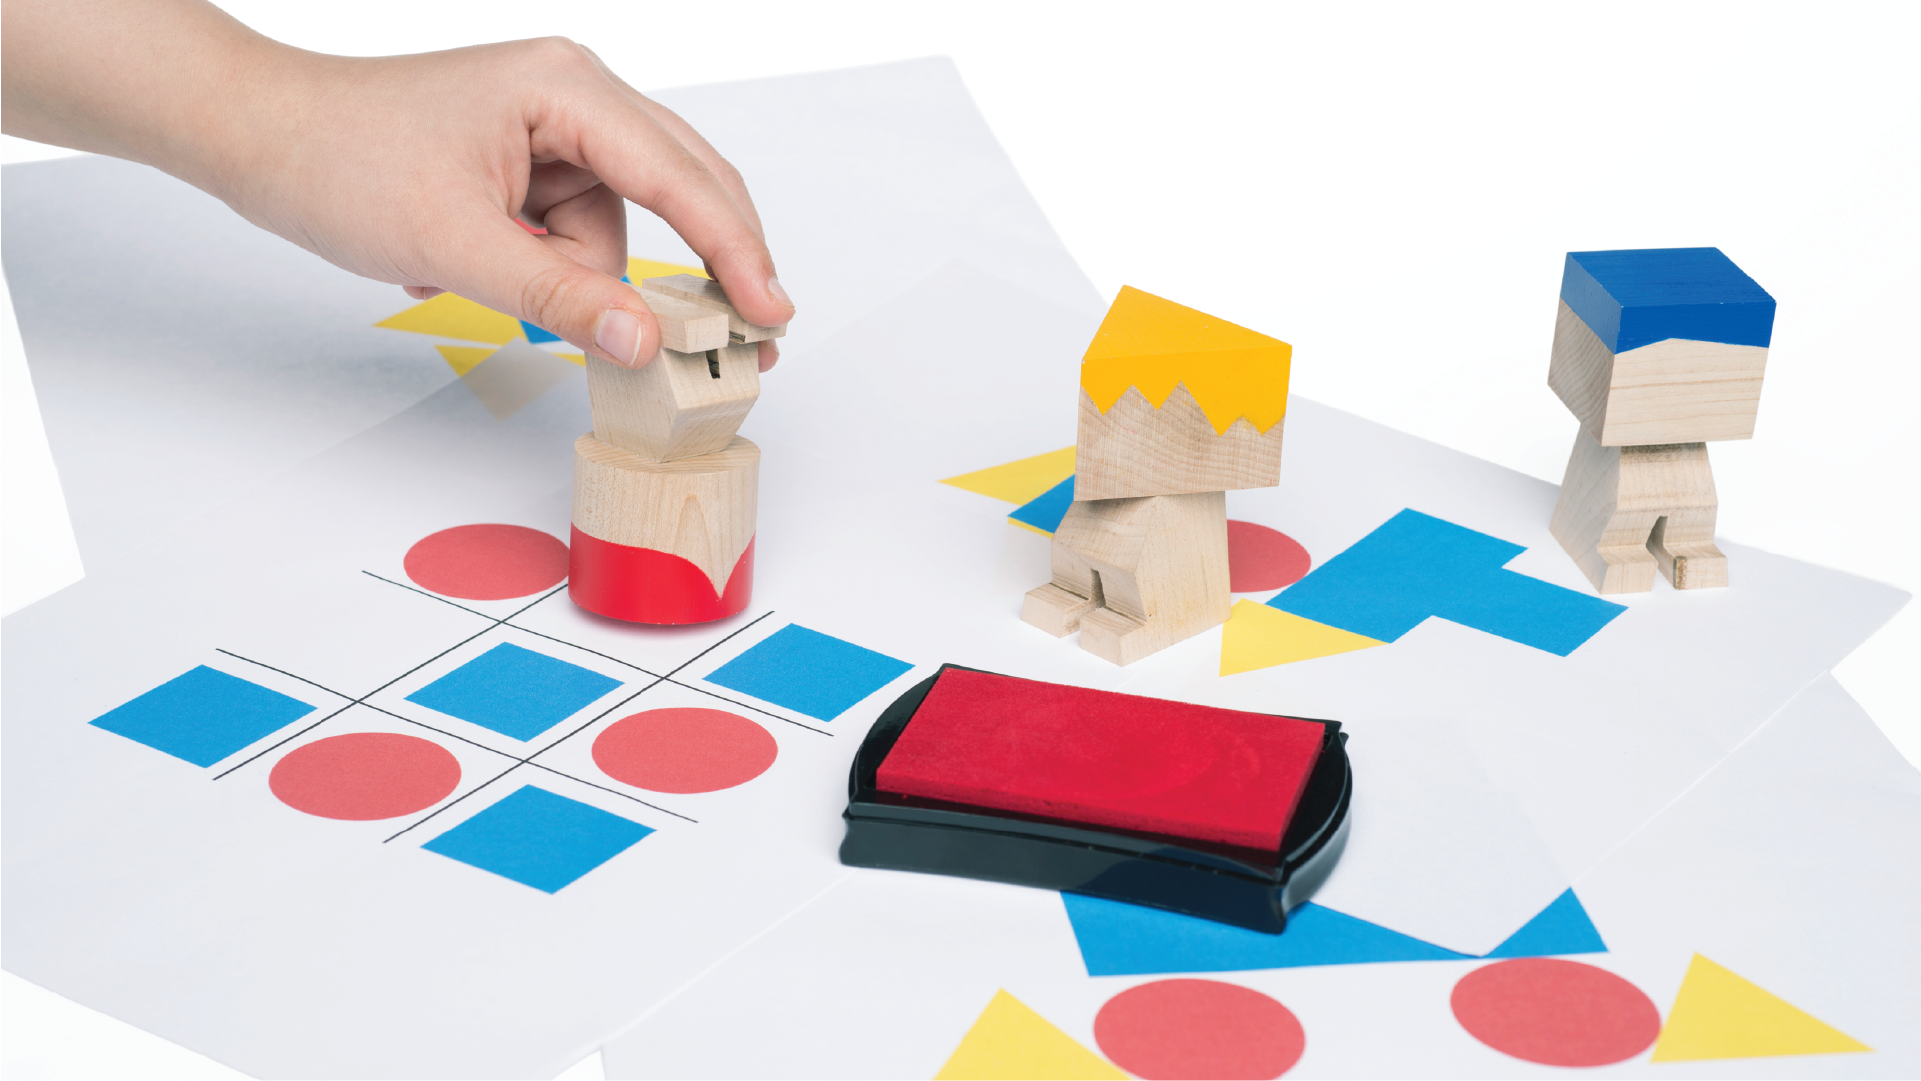 Hand placing the wooden mini figure on a Tic-Tac-Toe set. The other mini figures are place on the corner together with a case.